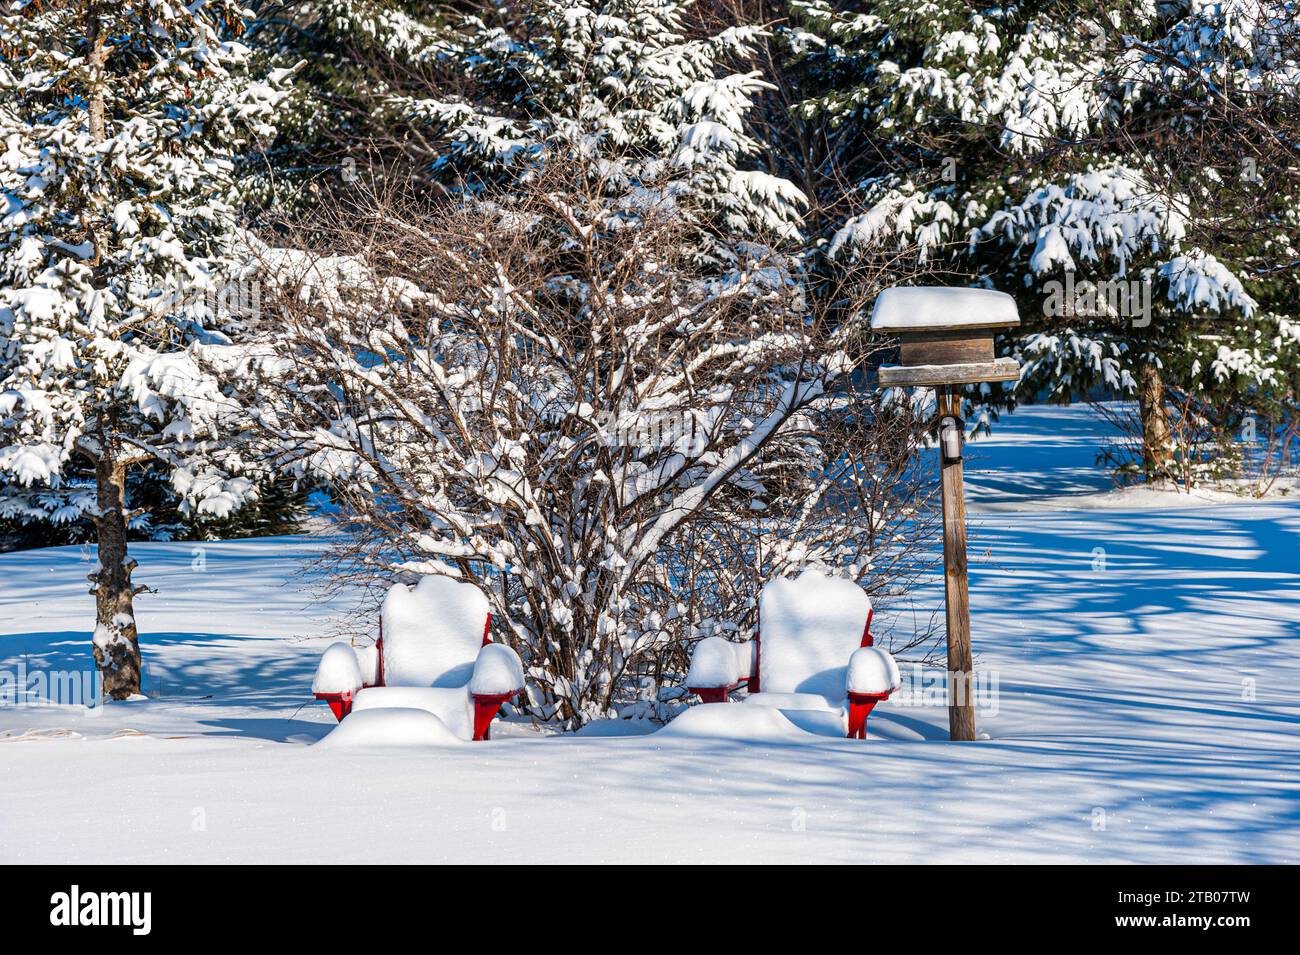 two red muskoka chairs in snow Stock Photo